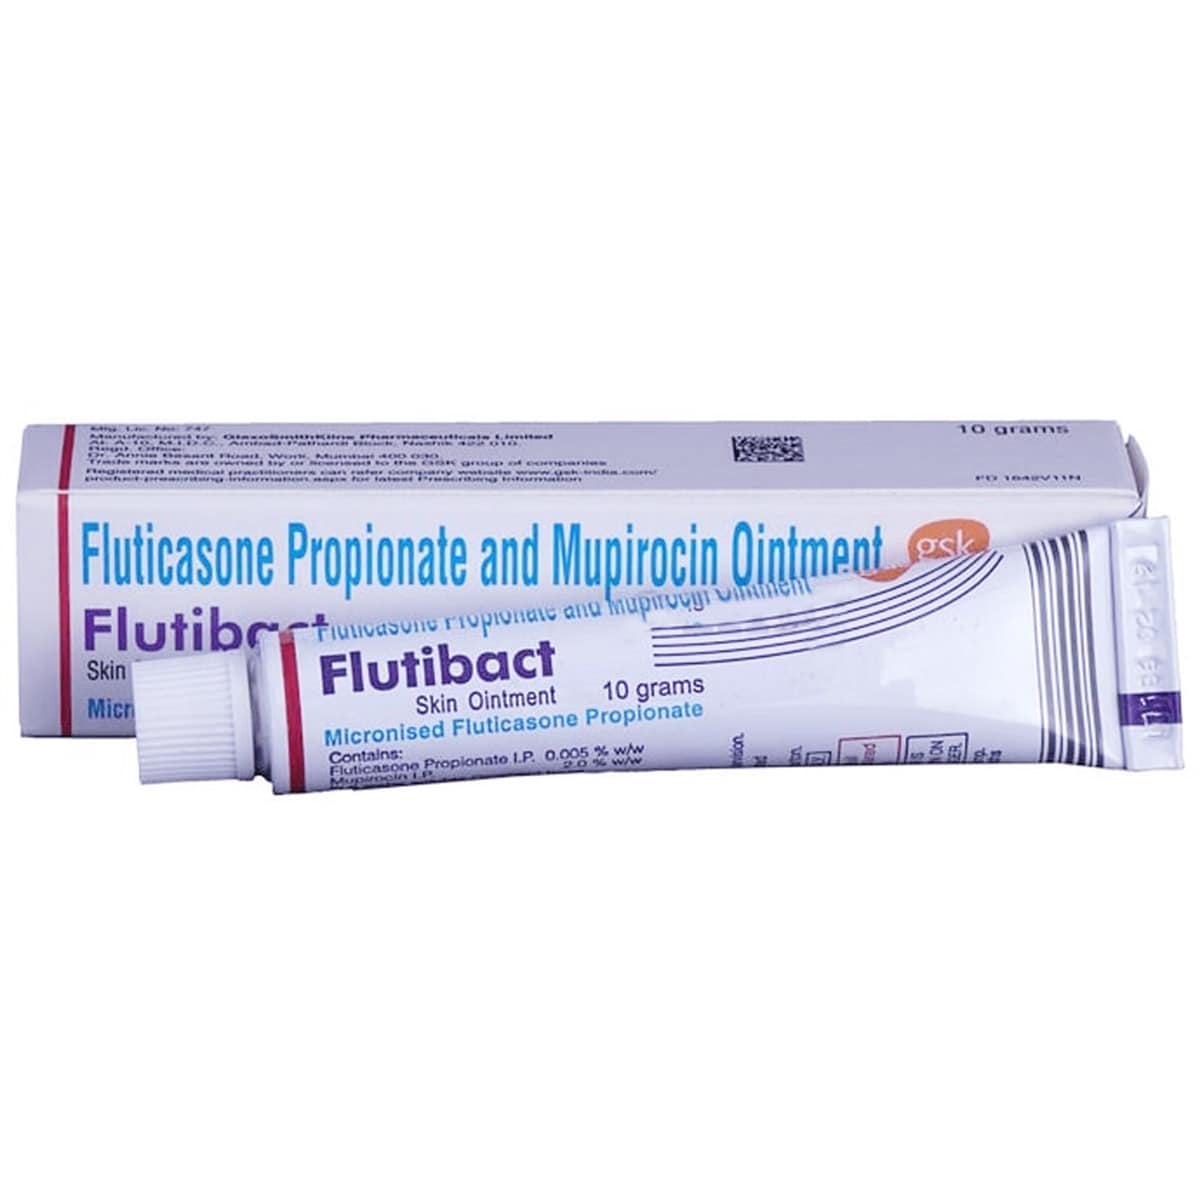 Flutibact Ointment 10 gm, Pack of 1 Ointment